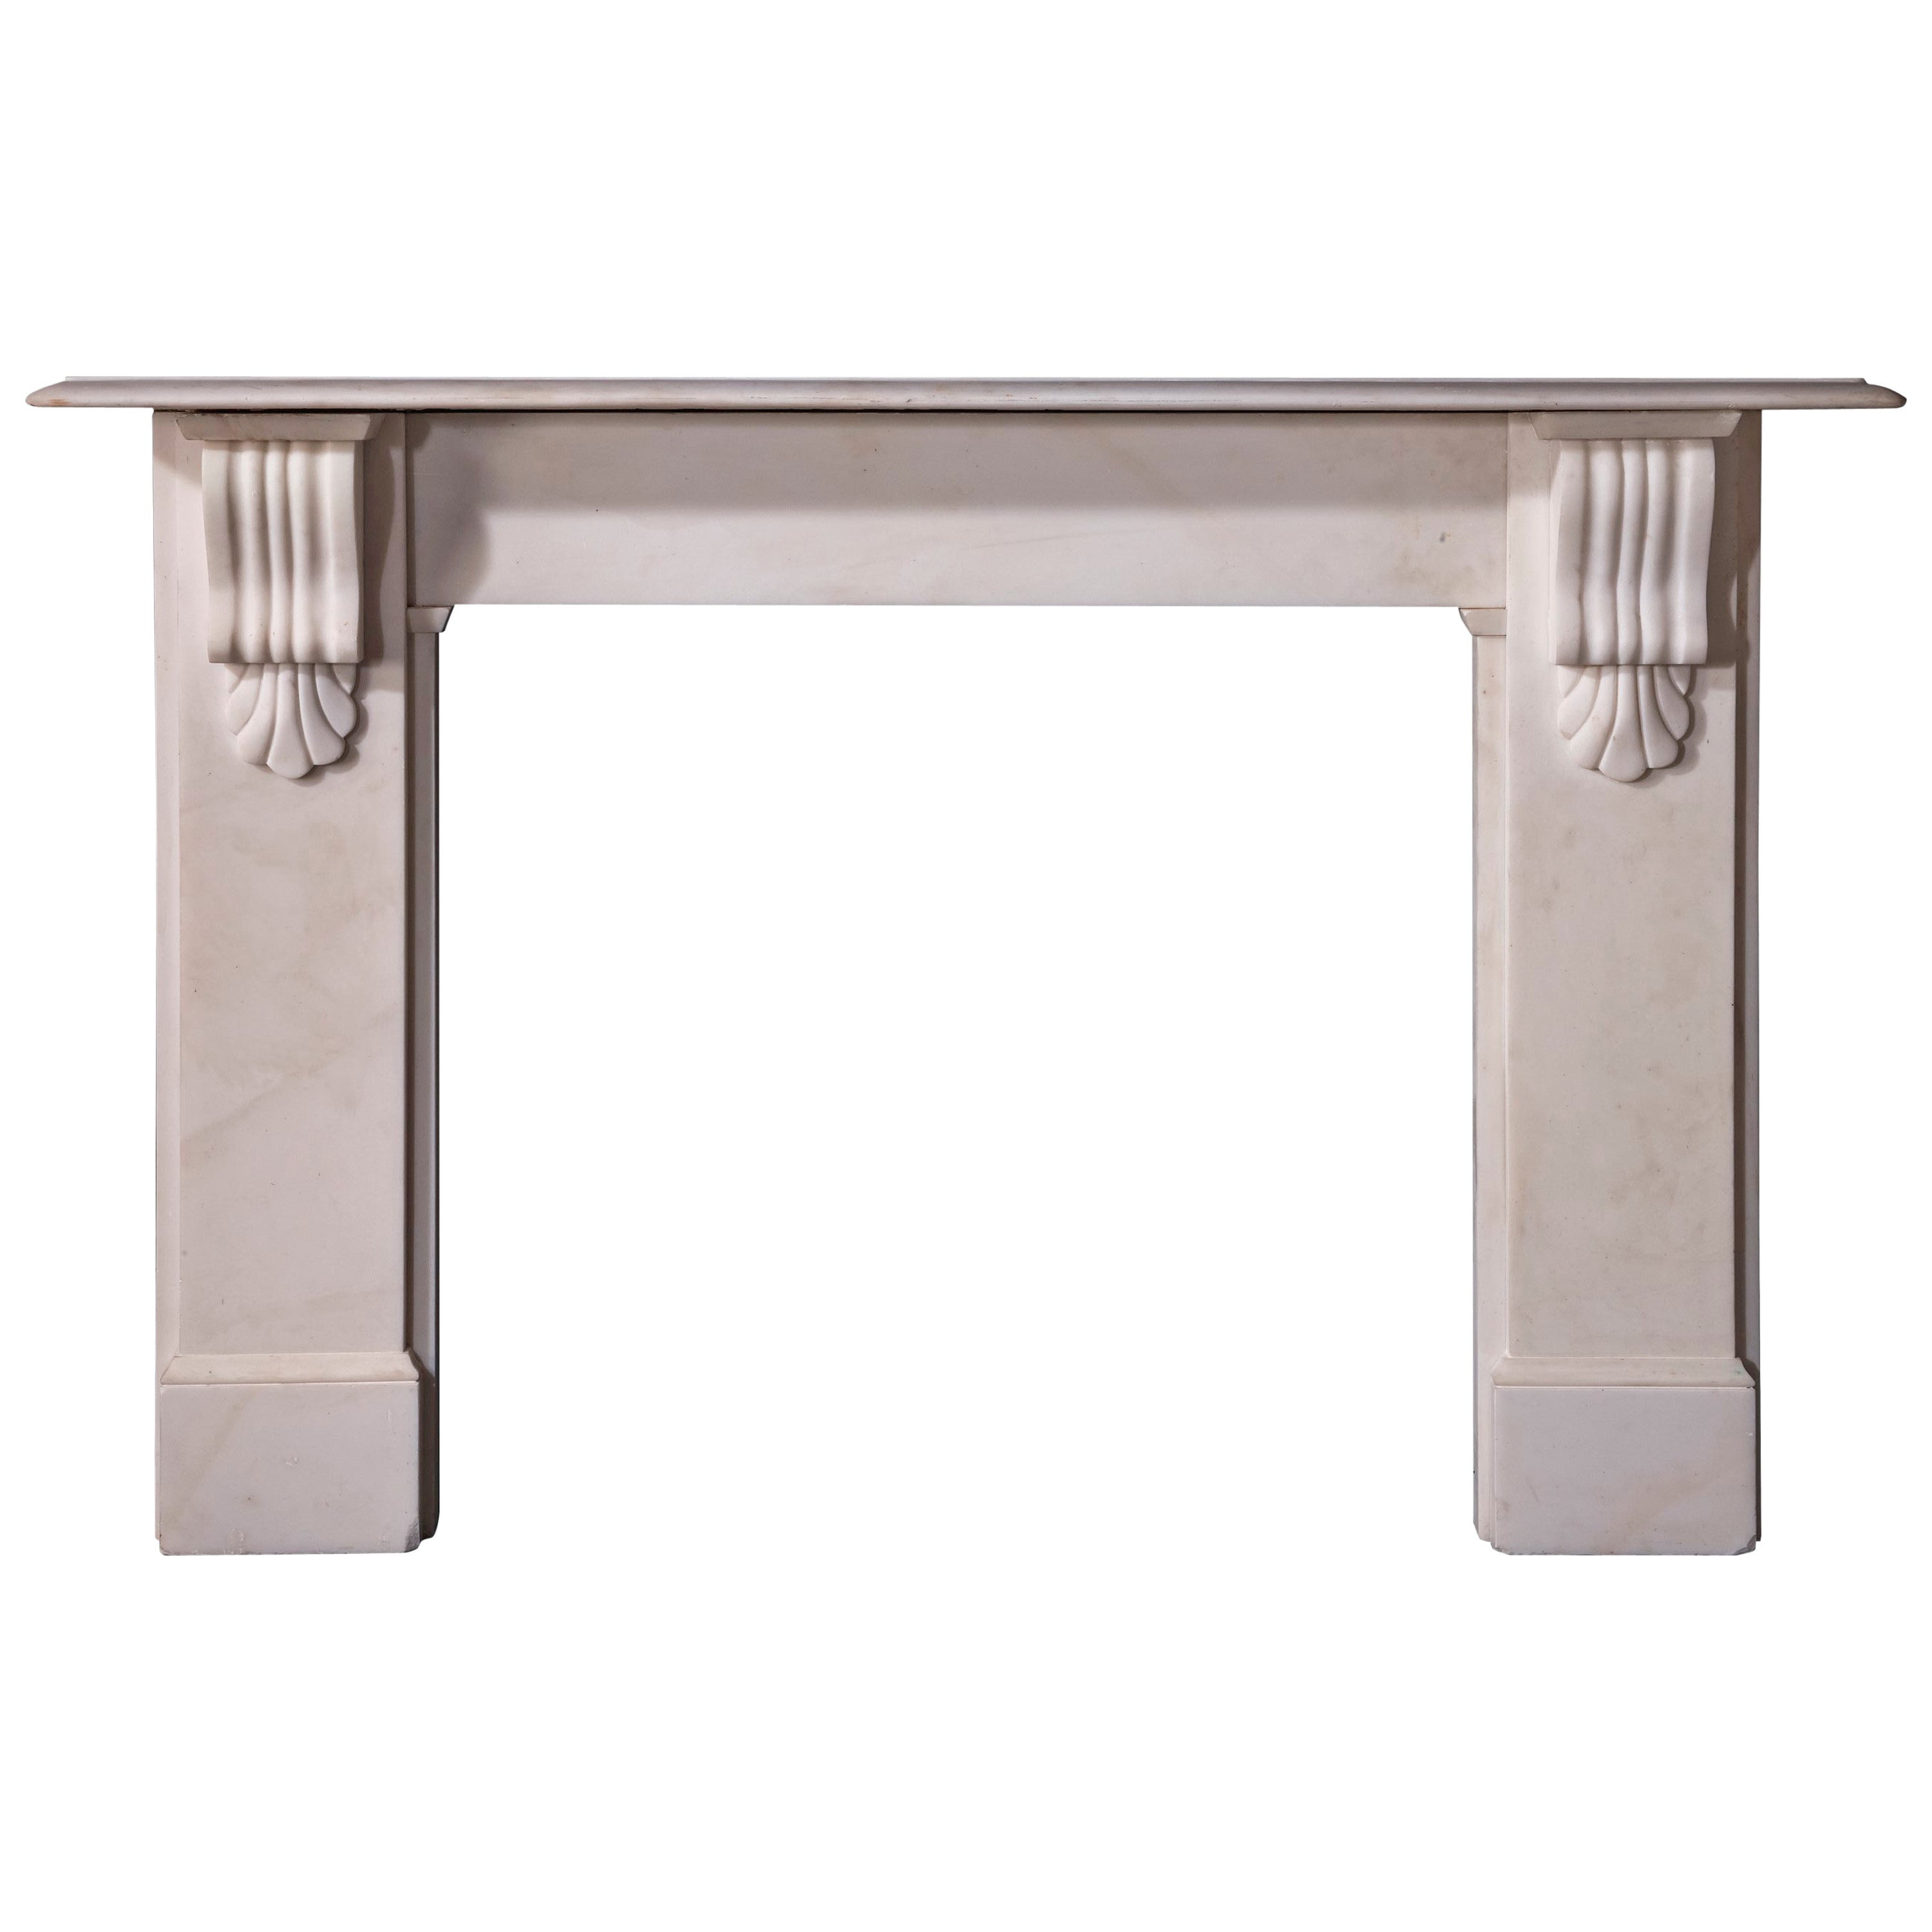 Late 20th Century White Marble Fireplace For Sale